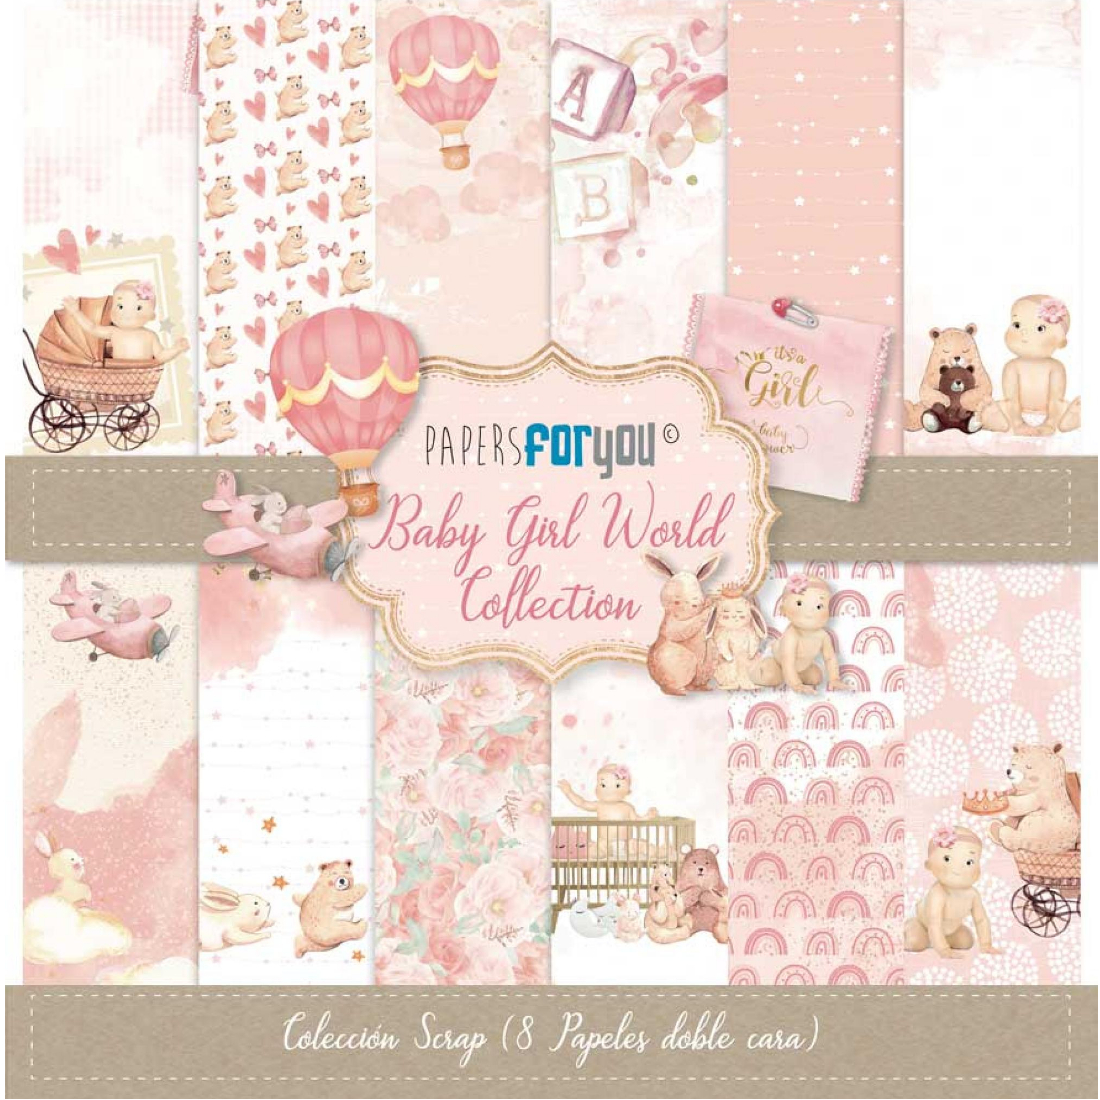 Bloco Papel Scrapbooking Baby Girl World PFY-3450 papersforyou